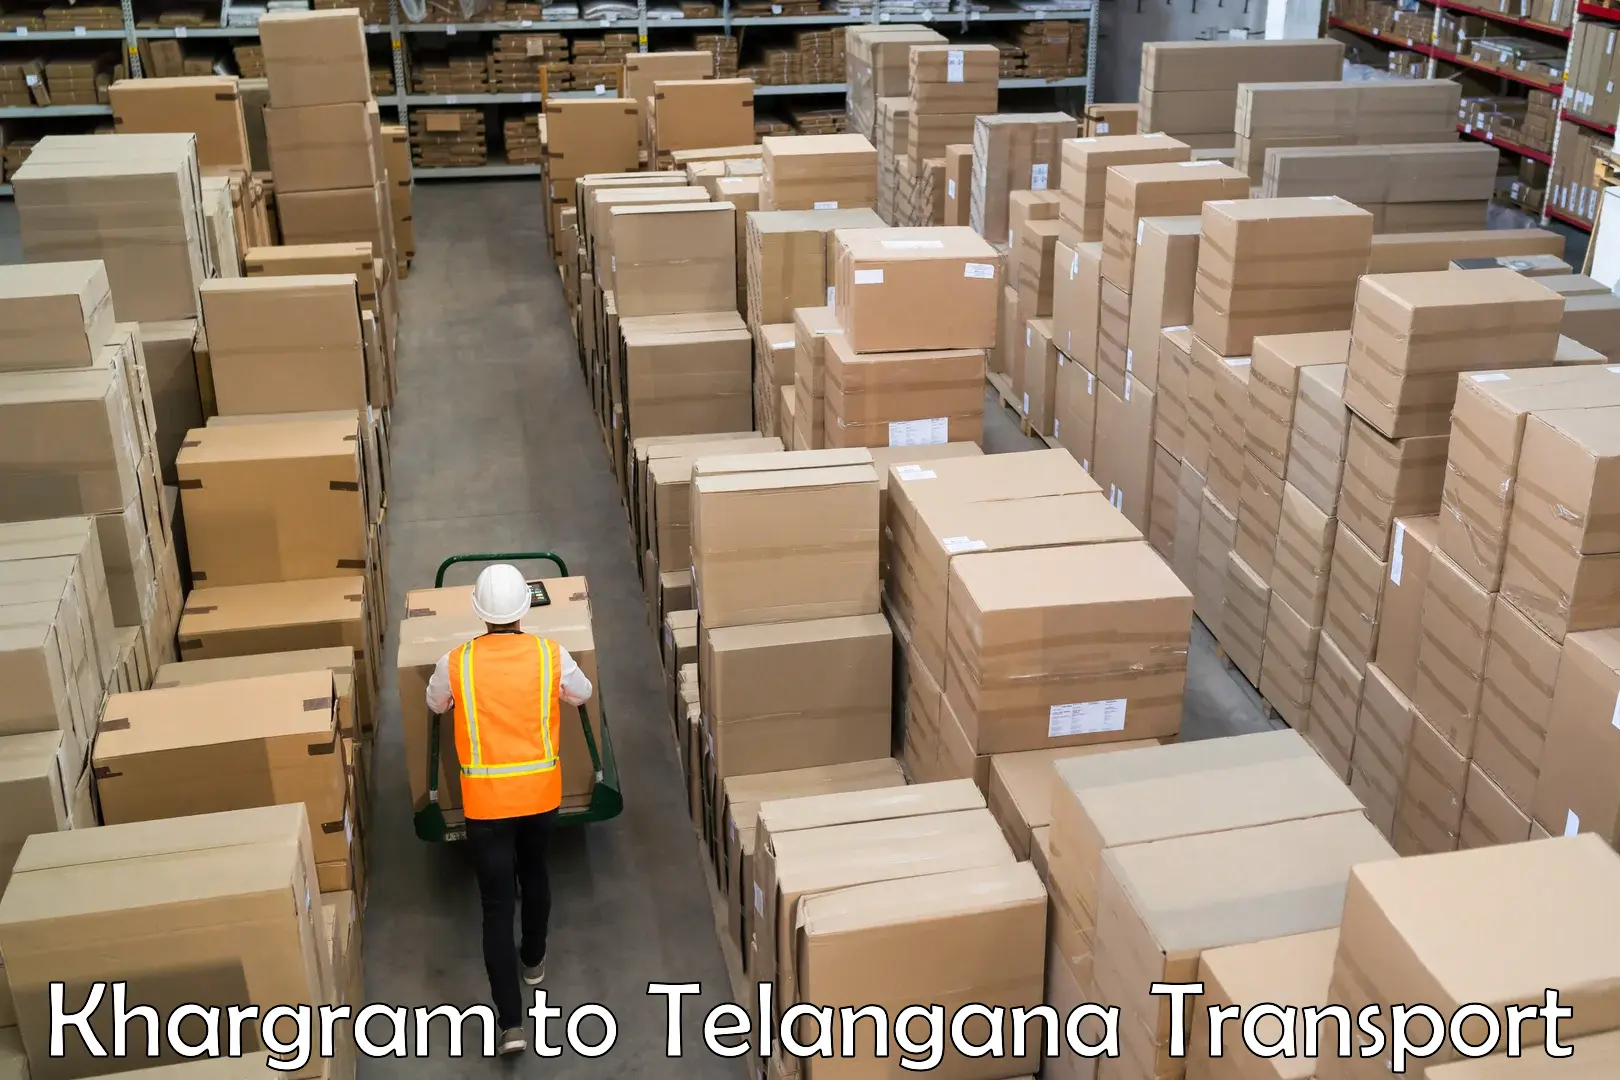 Truck transport companies in India in Khargram to Wyra